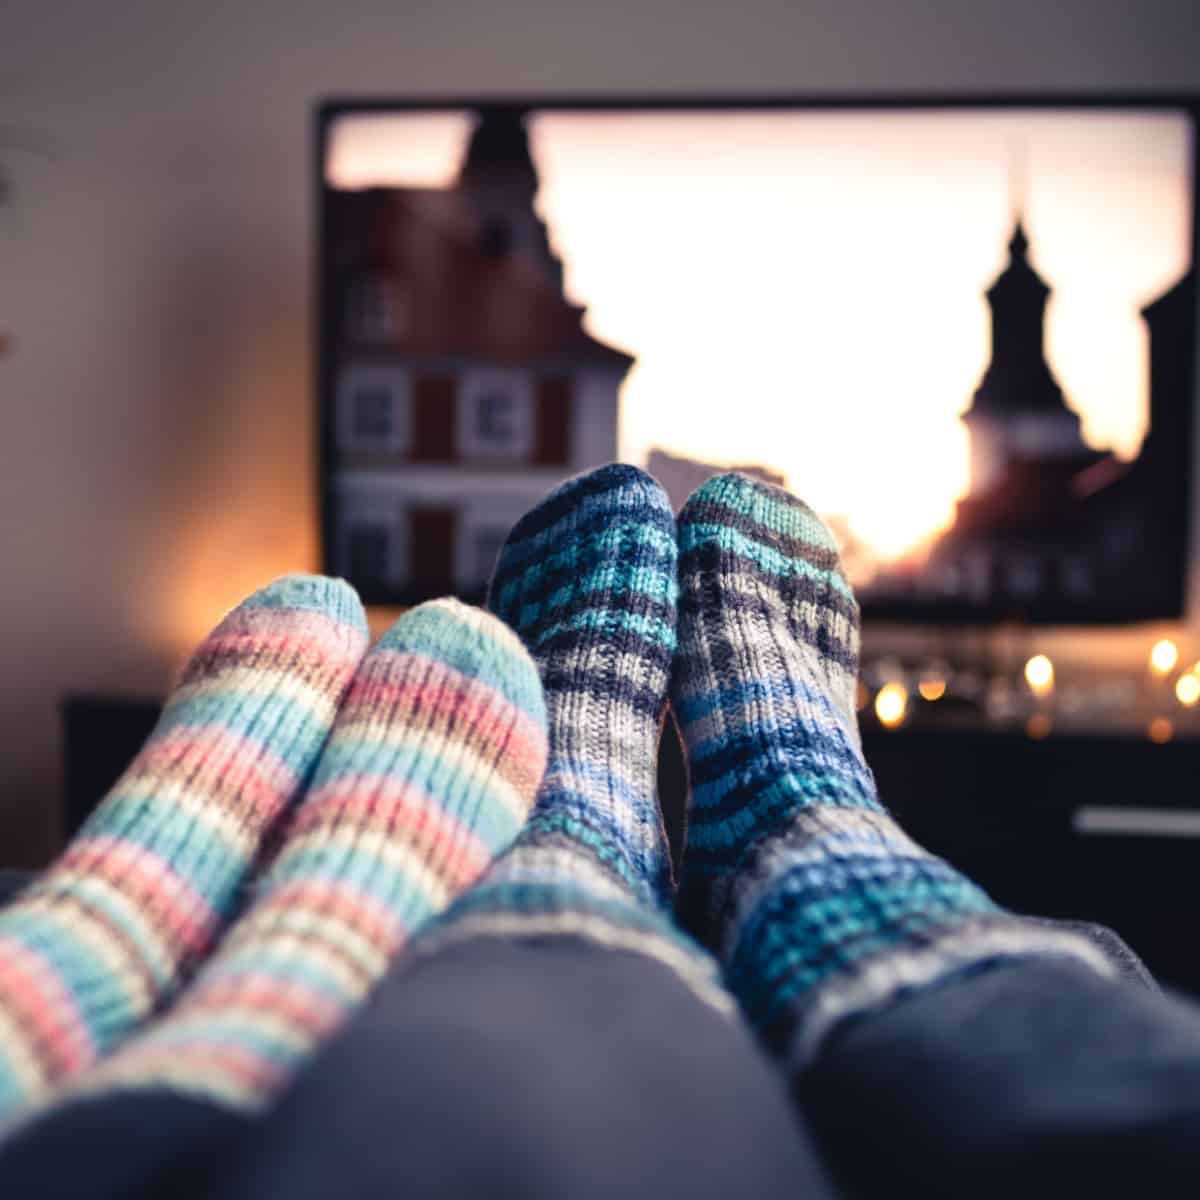 couple watching movie with feet up wearing warm socks